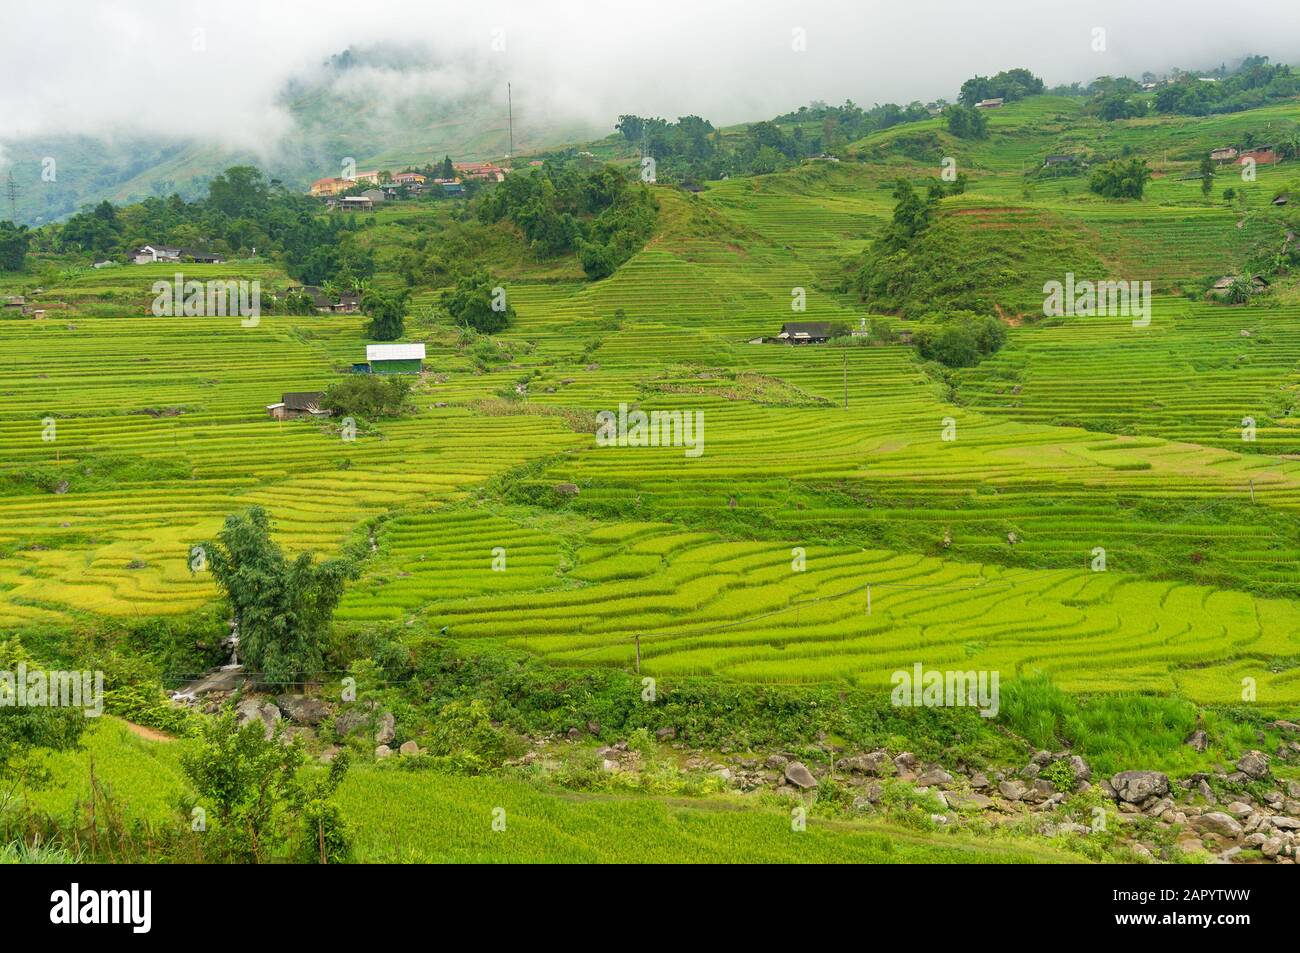 Agriculture scene with green rice terraces in rural Vietnam Stock Photo